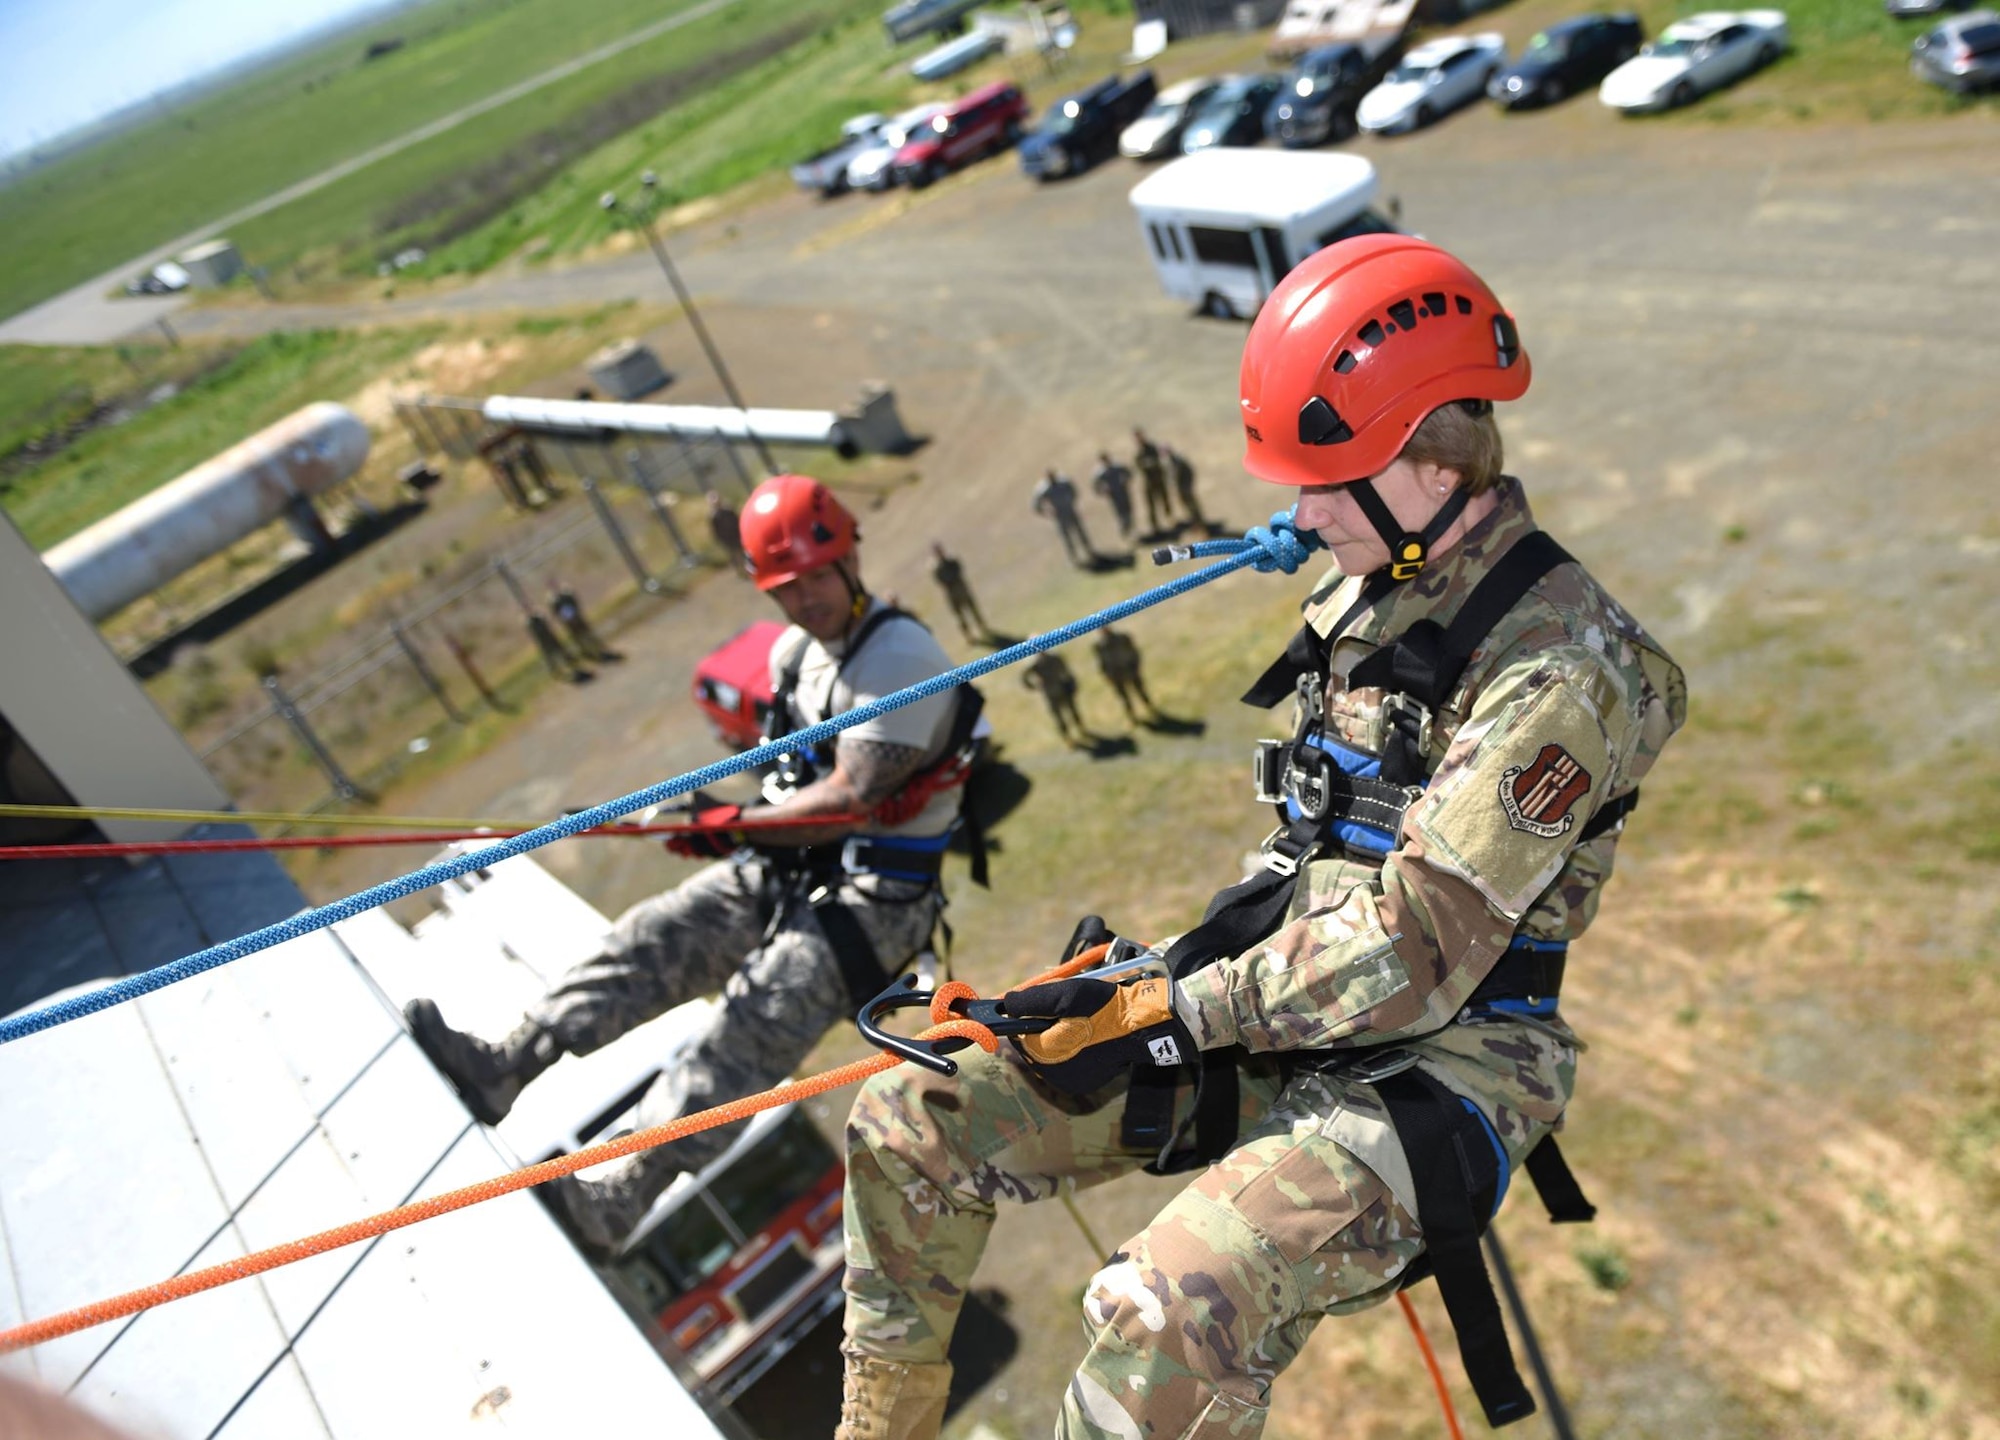 Gen. Maryanne Miller, Air Mobility Command commander, rappels down a building with the help of the 60th Civil Engineer Squadron as part of a tour of Travis Air Force Base, California, April 18, 2019. The tour served to highlight the relationship Travis’ major command has with its bases’ Airmen while also working to inspire innovative efforts among its respective squadrons. (U.S. Air Force photo by Airman 1st Class Christian Conrad)